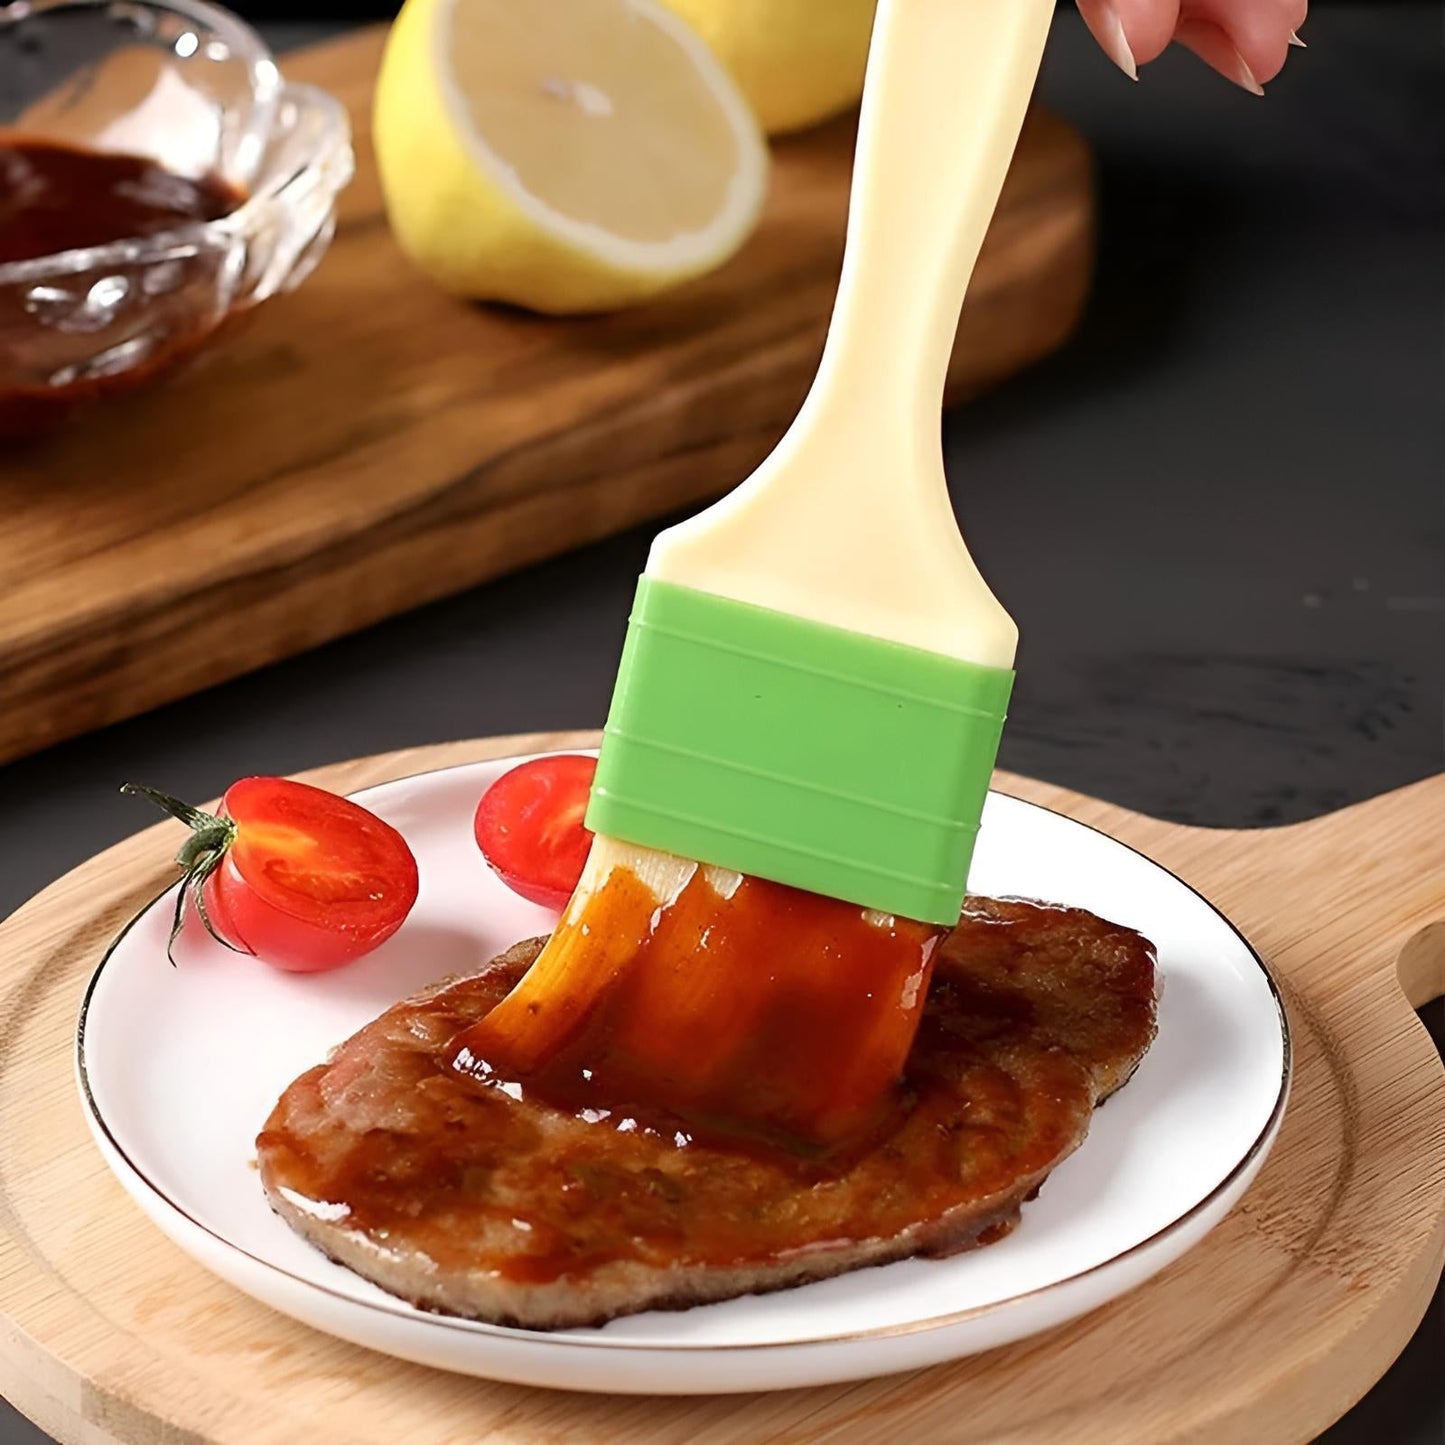 Multipurpose Kitchen BBQ Pastry Brush with Plastic Handle Large